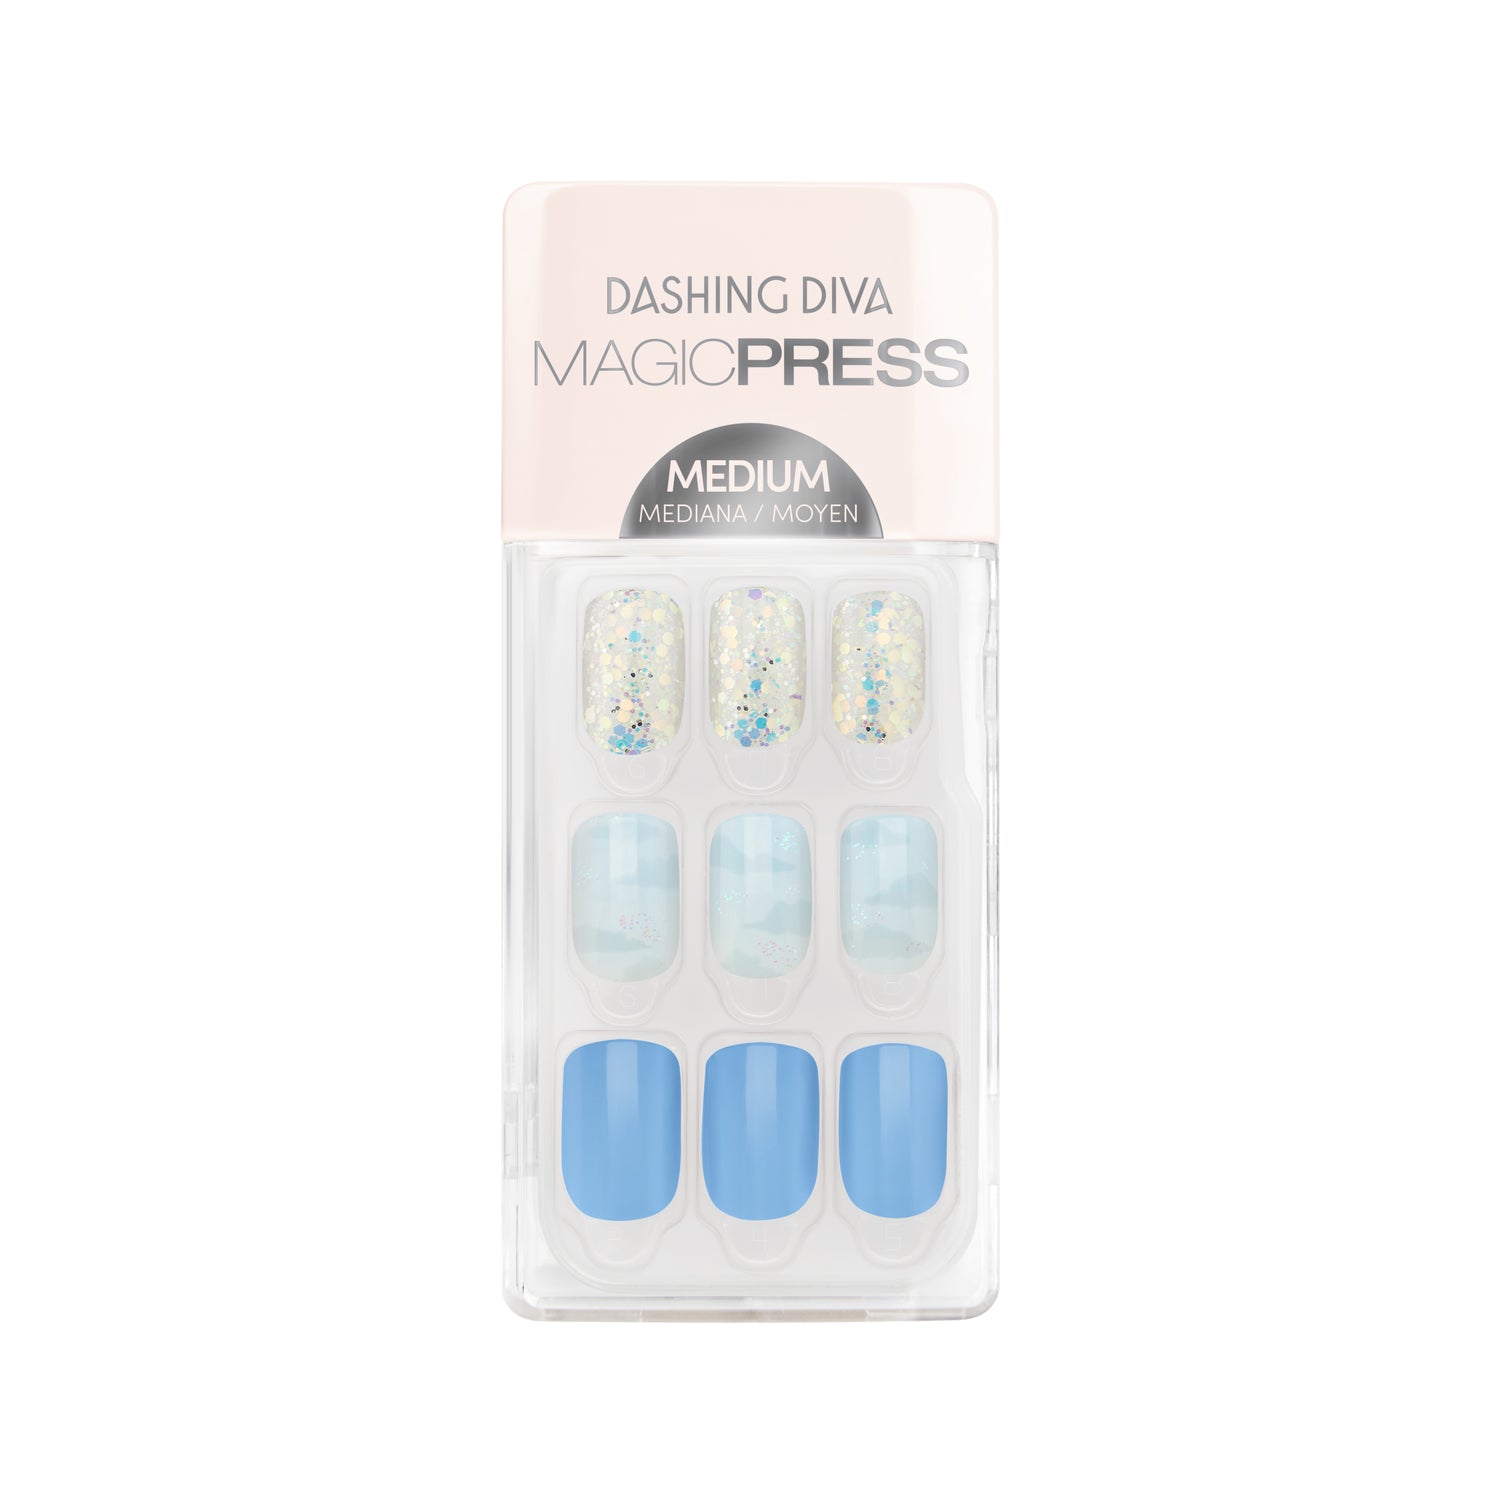 Dashing Diva MAGIC PRESS medium, square sky blue press on gel nails with cloud and iridescent glitter accents.